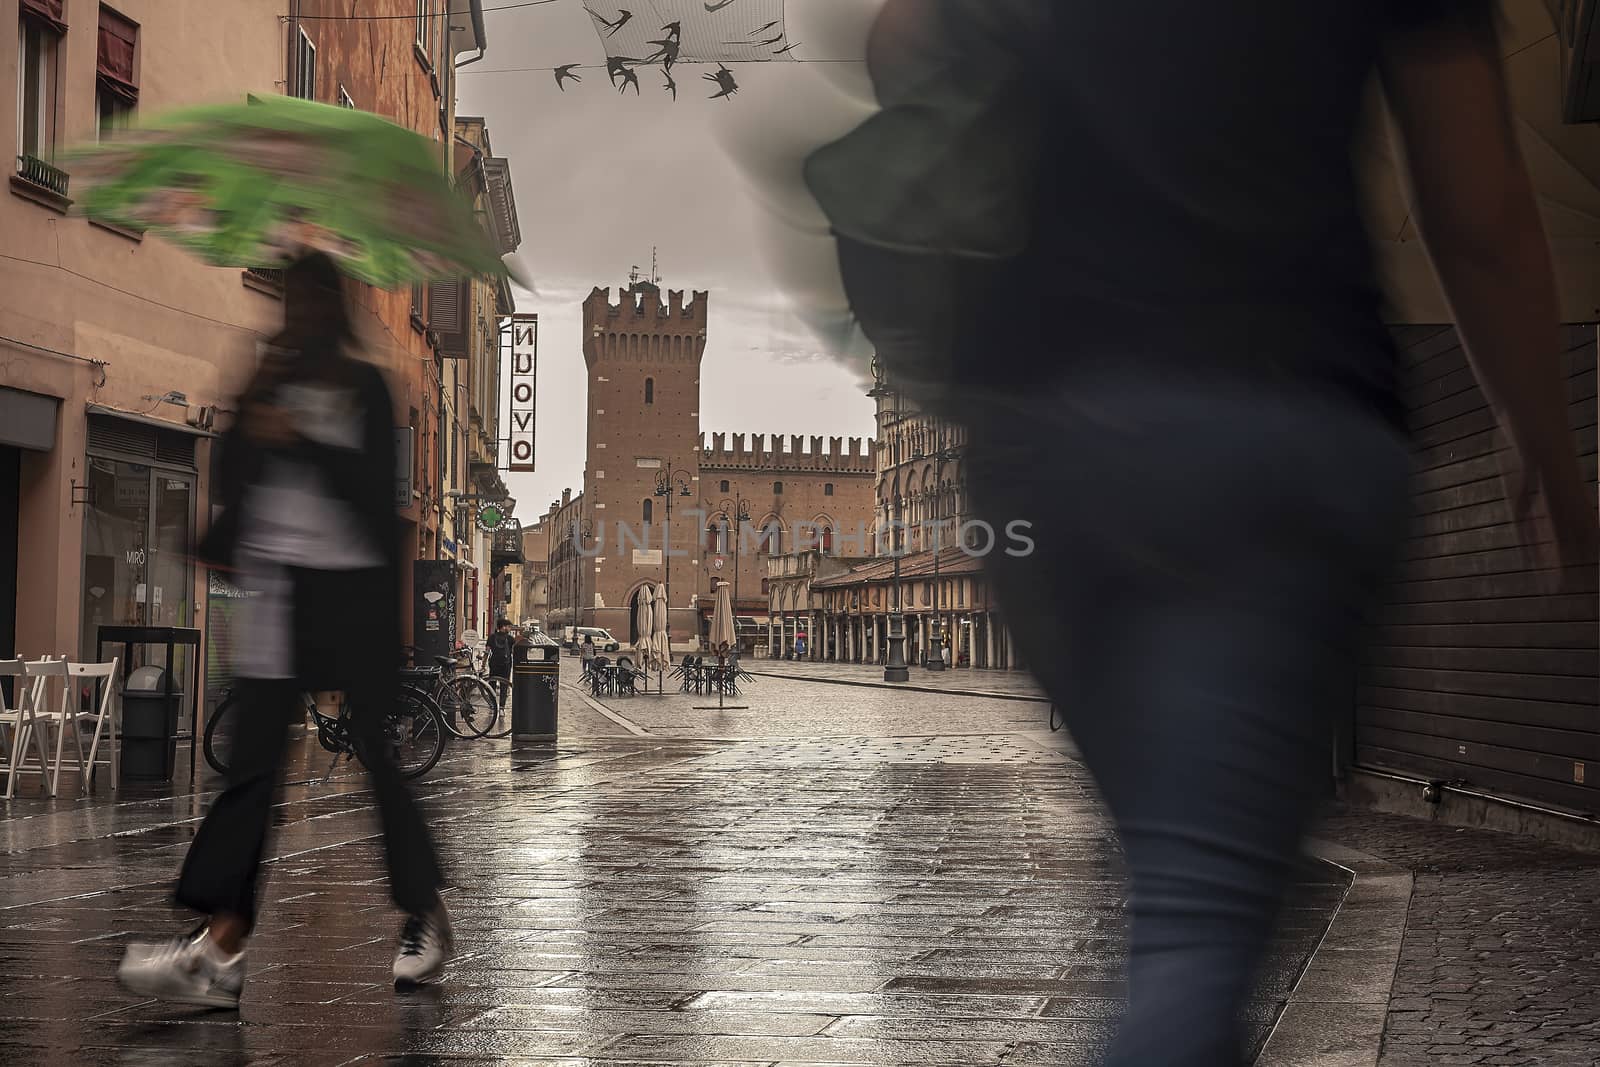 Evocative view of the street that leads to Piazza Trento Trieste in Ferrara 6 by pippocarlot